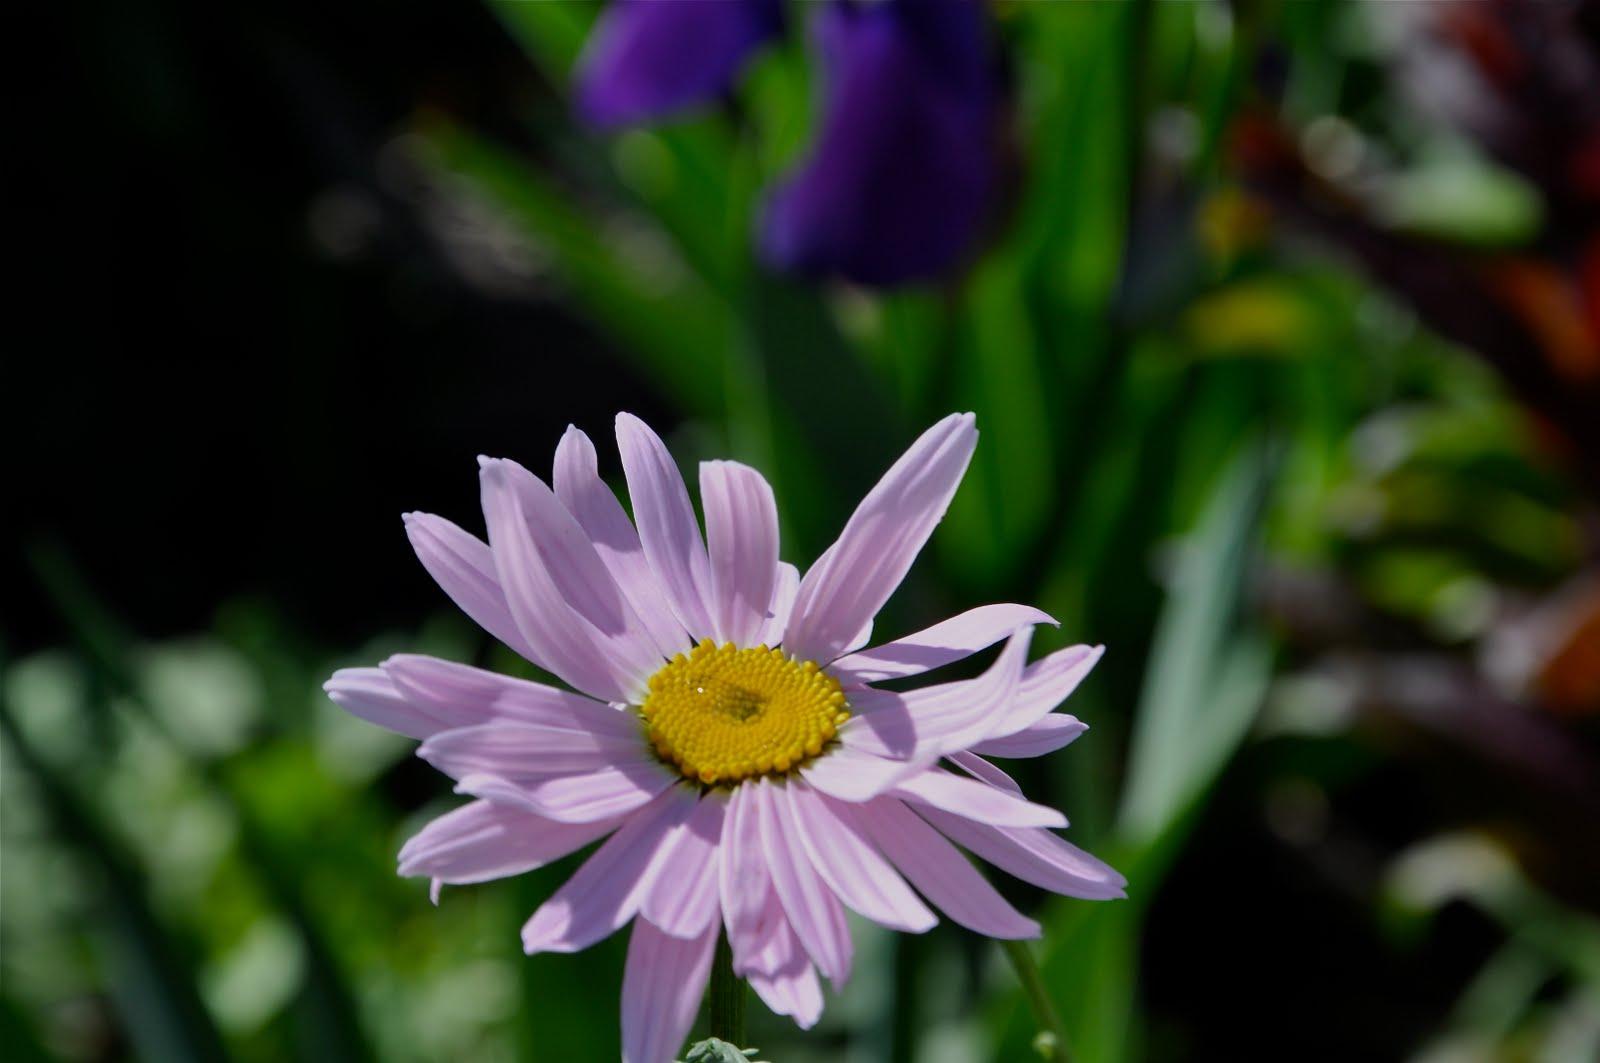 This is a Painted Daisy,